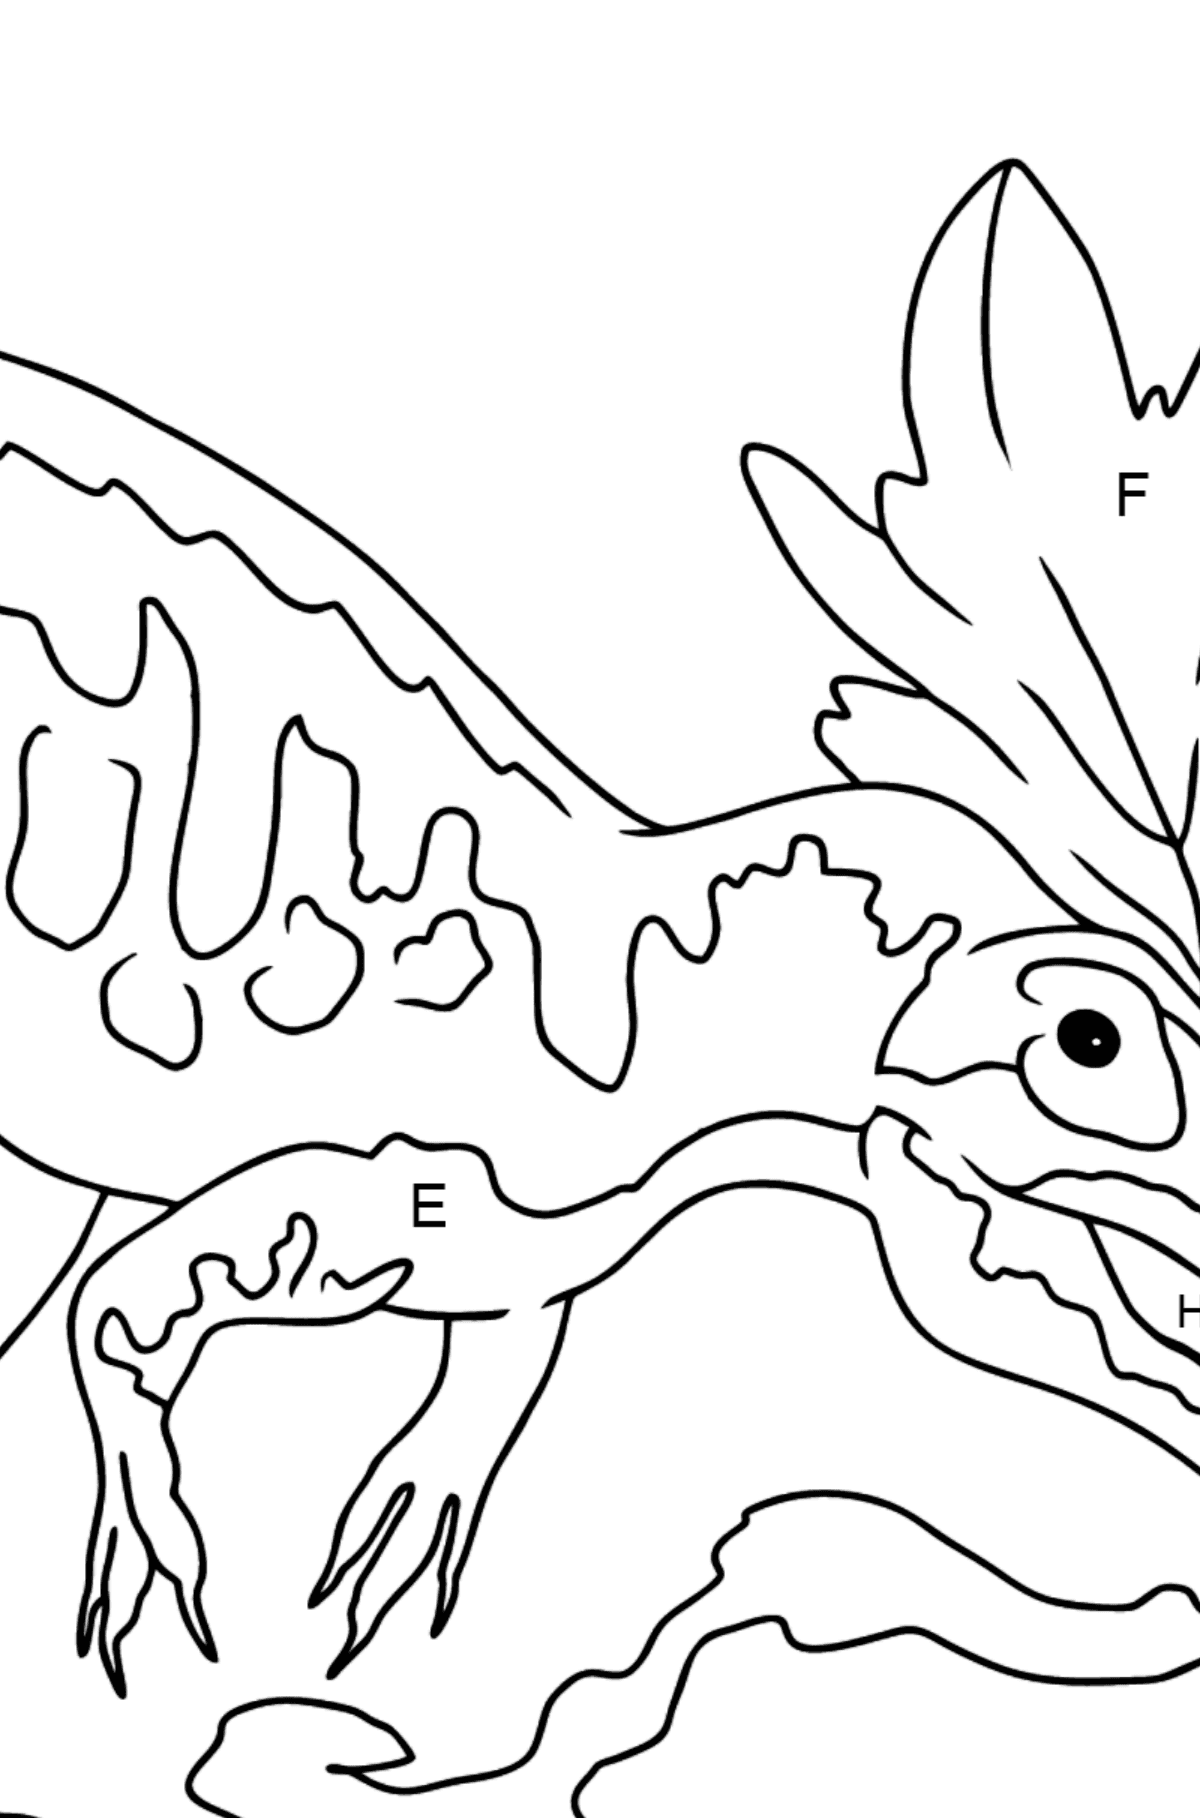 Allosaurus Coloring Page - Coloring by Letters for Kids